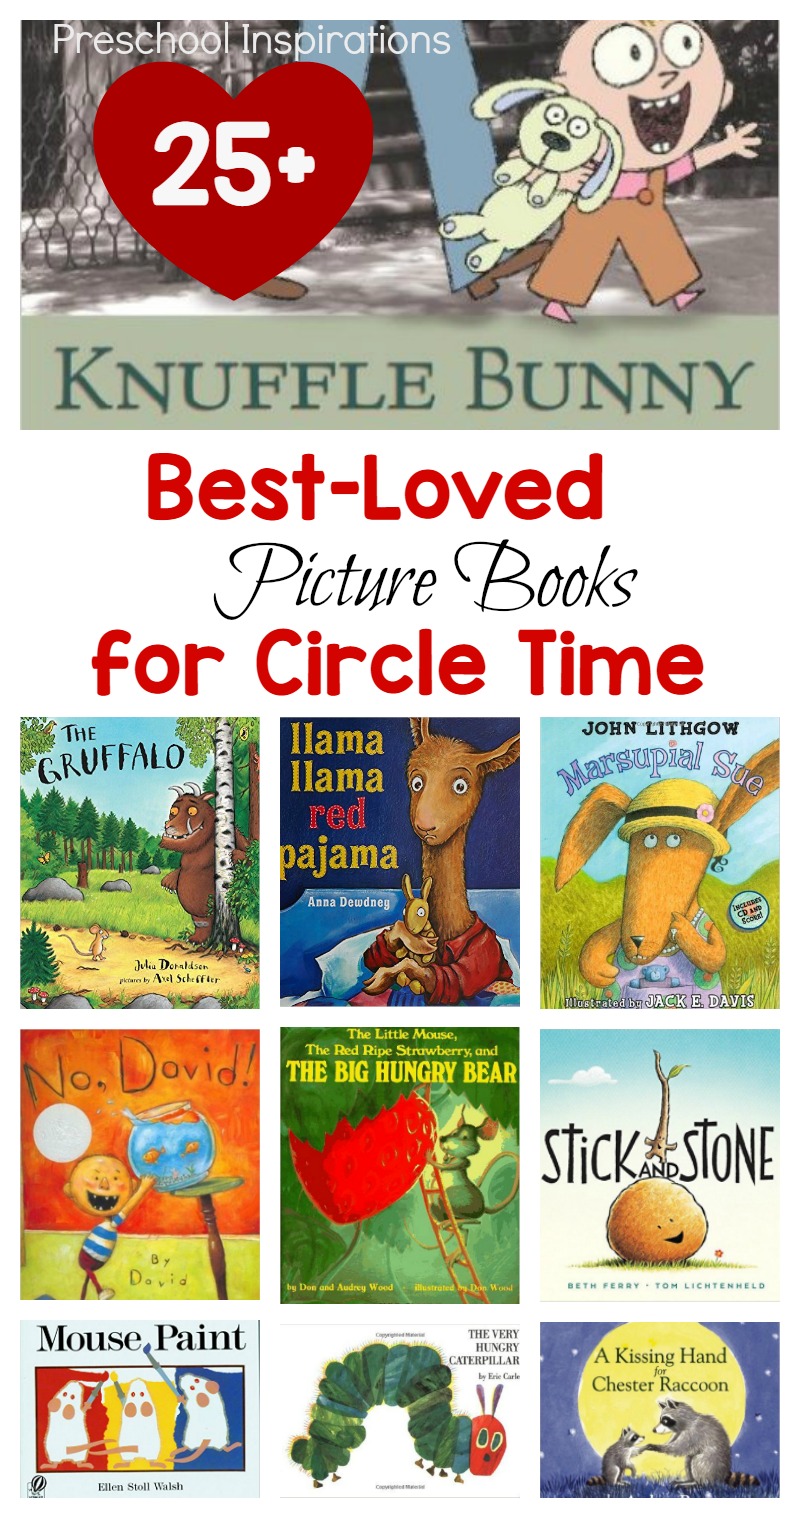 Need the perfect book for a read aloud? Here are 25+ of the most popular children